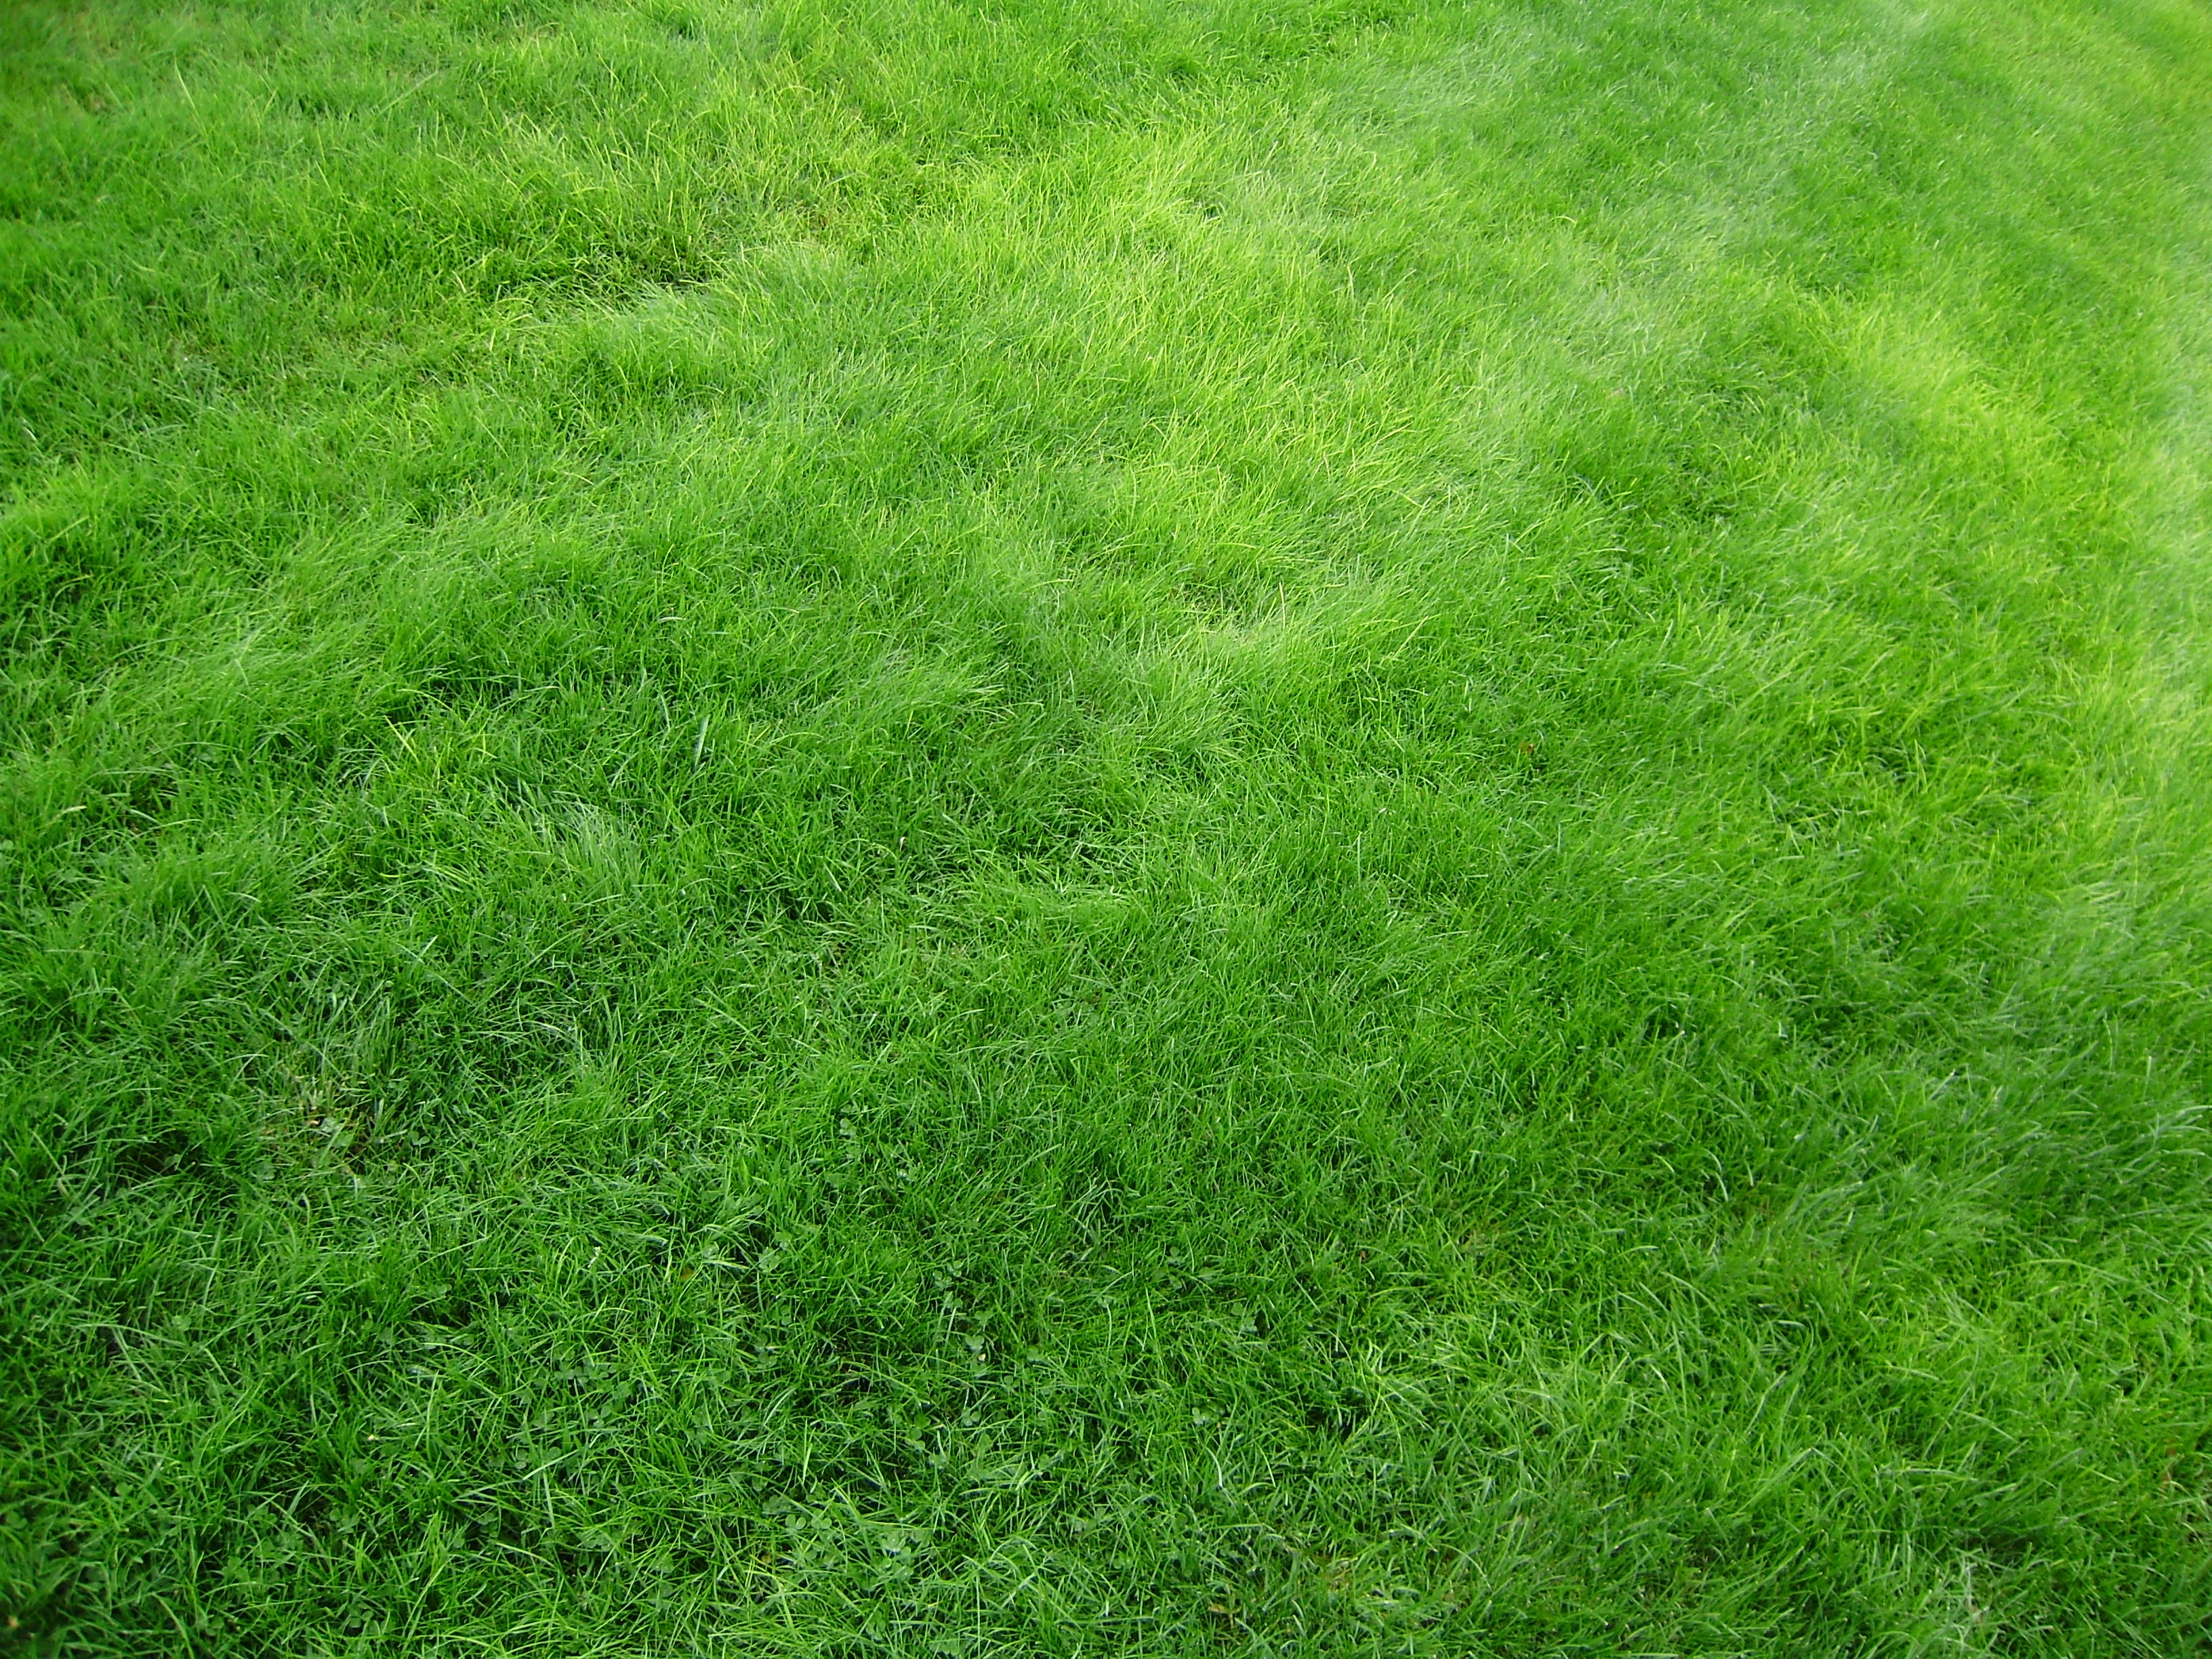 grass, lawn, green, texture, field, textures cell phone wallpapers